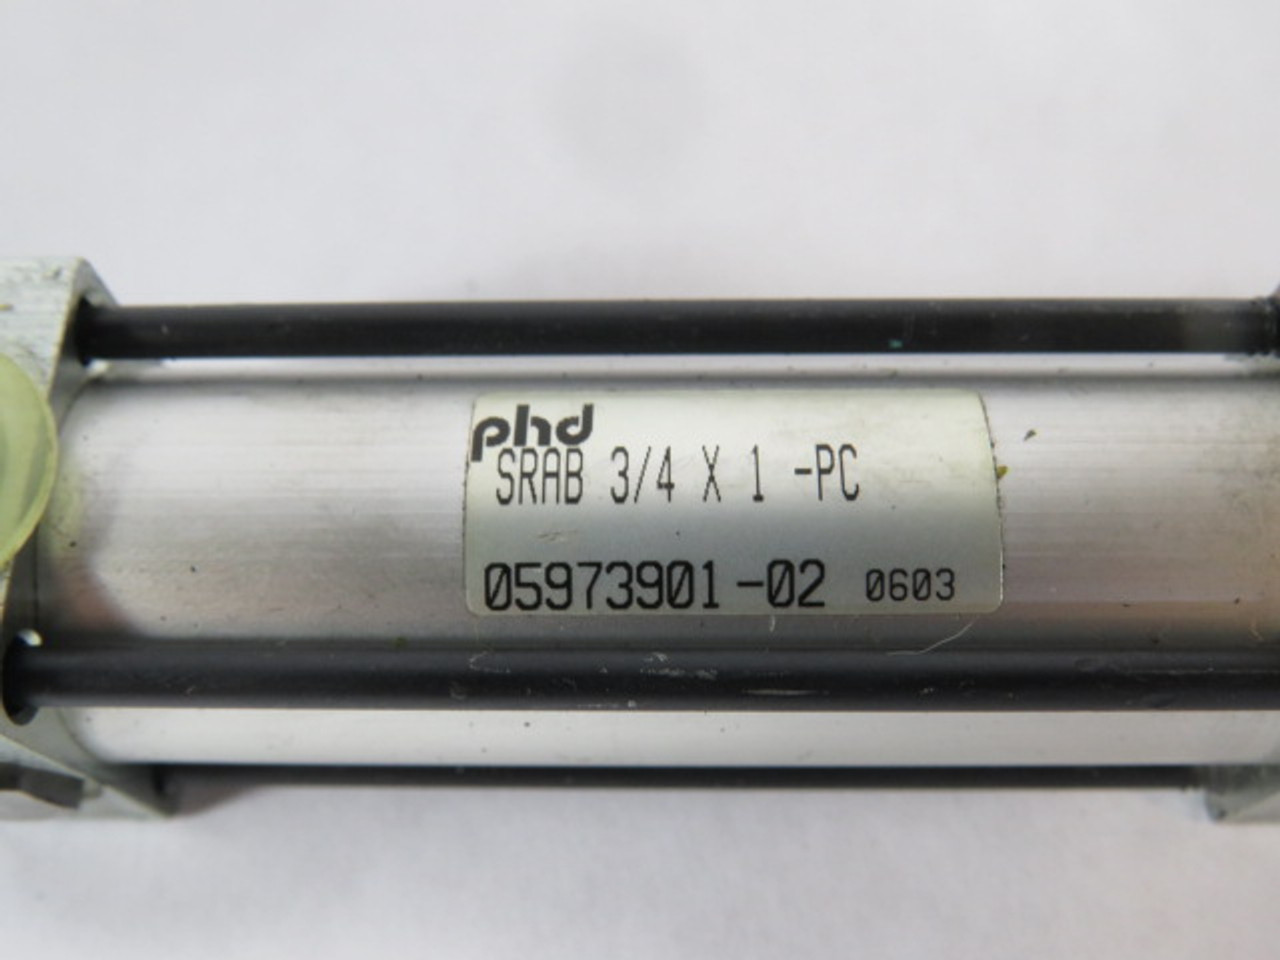 Phd SRAB3/4X1-PC Pneumatic Cylinder 3/4" Bore 1" Stroke USED